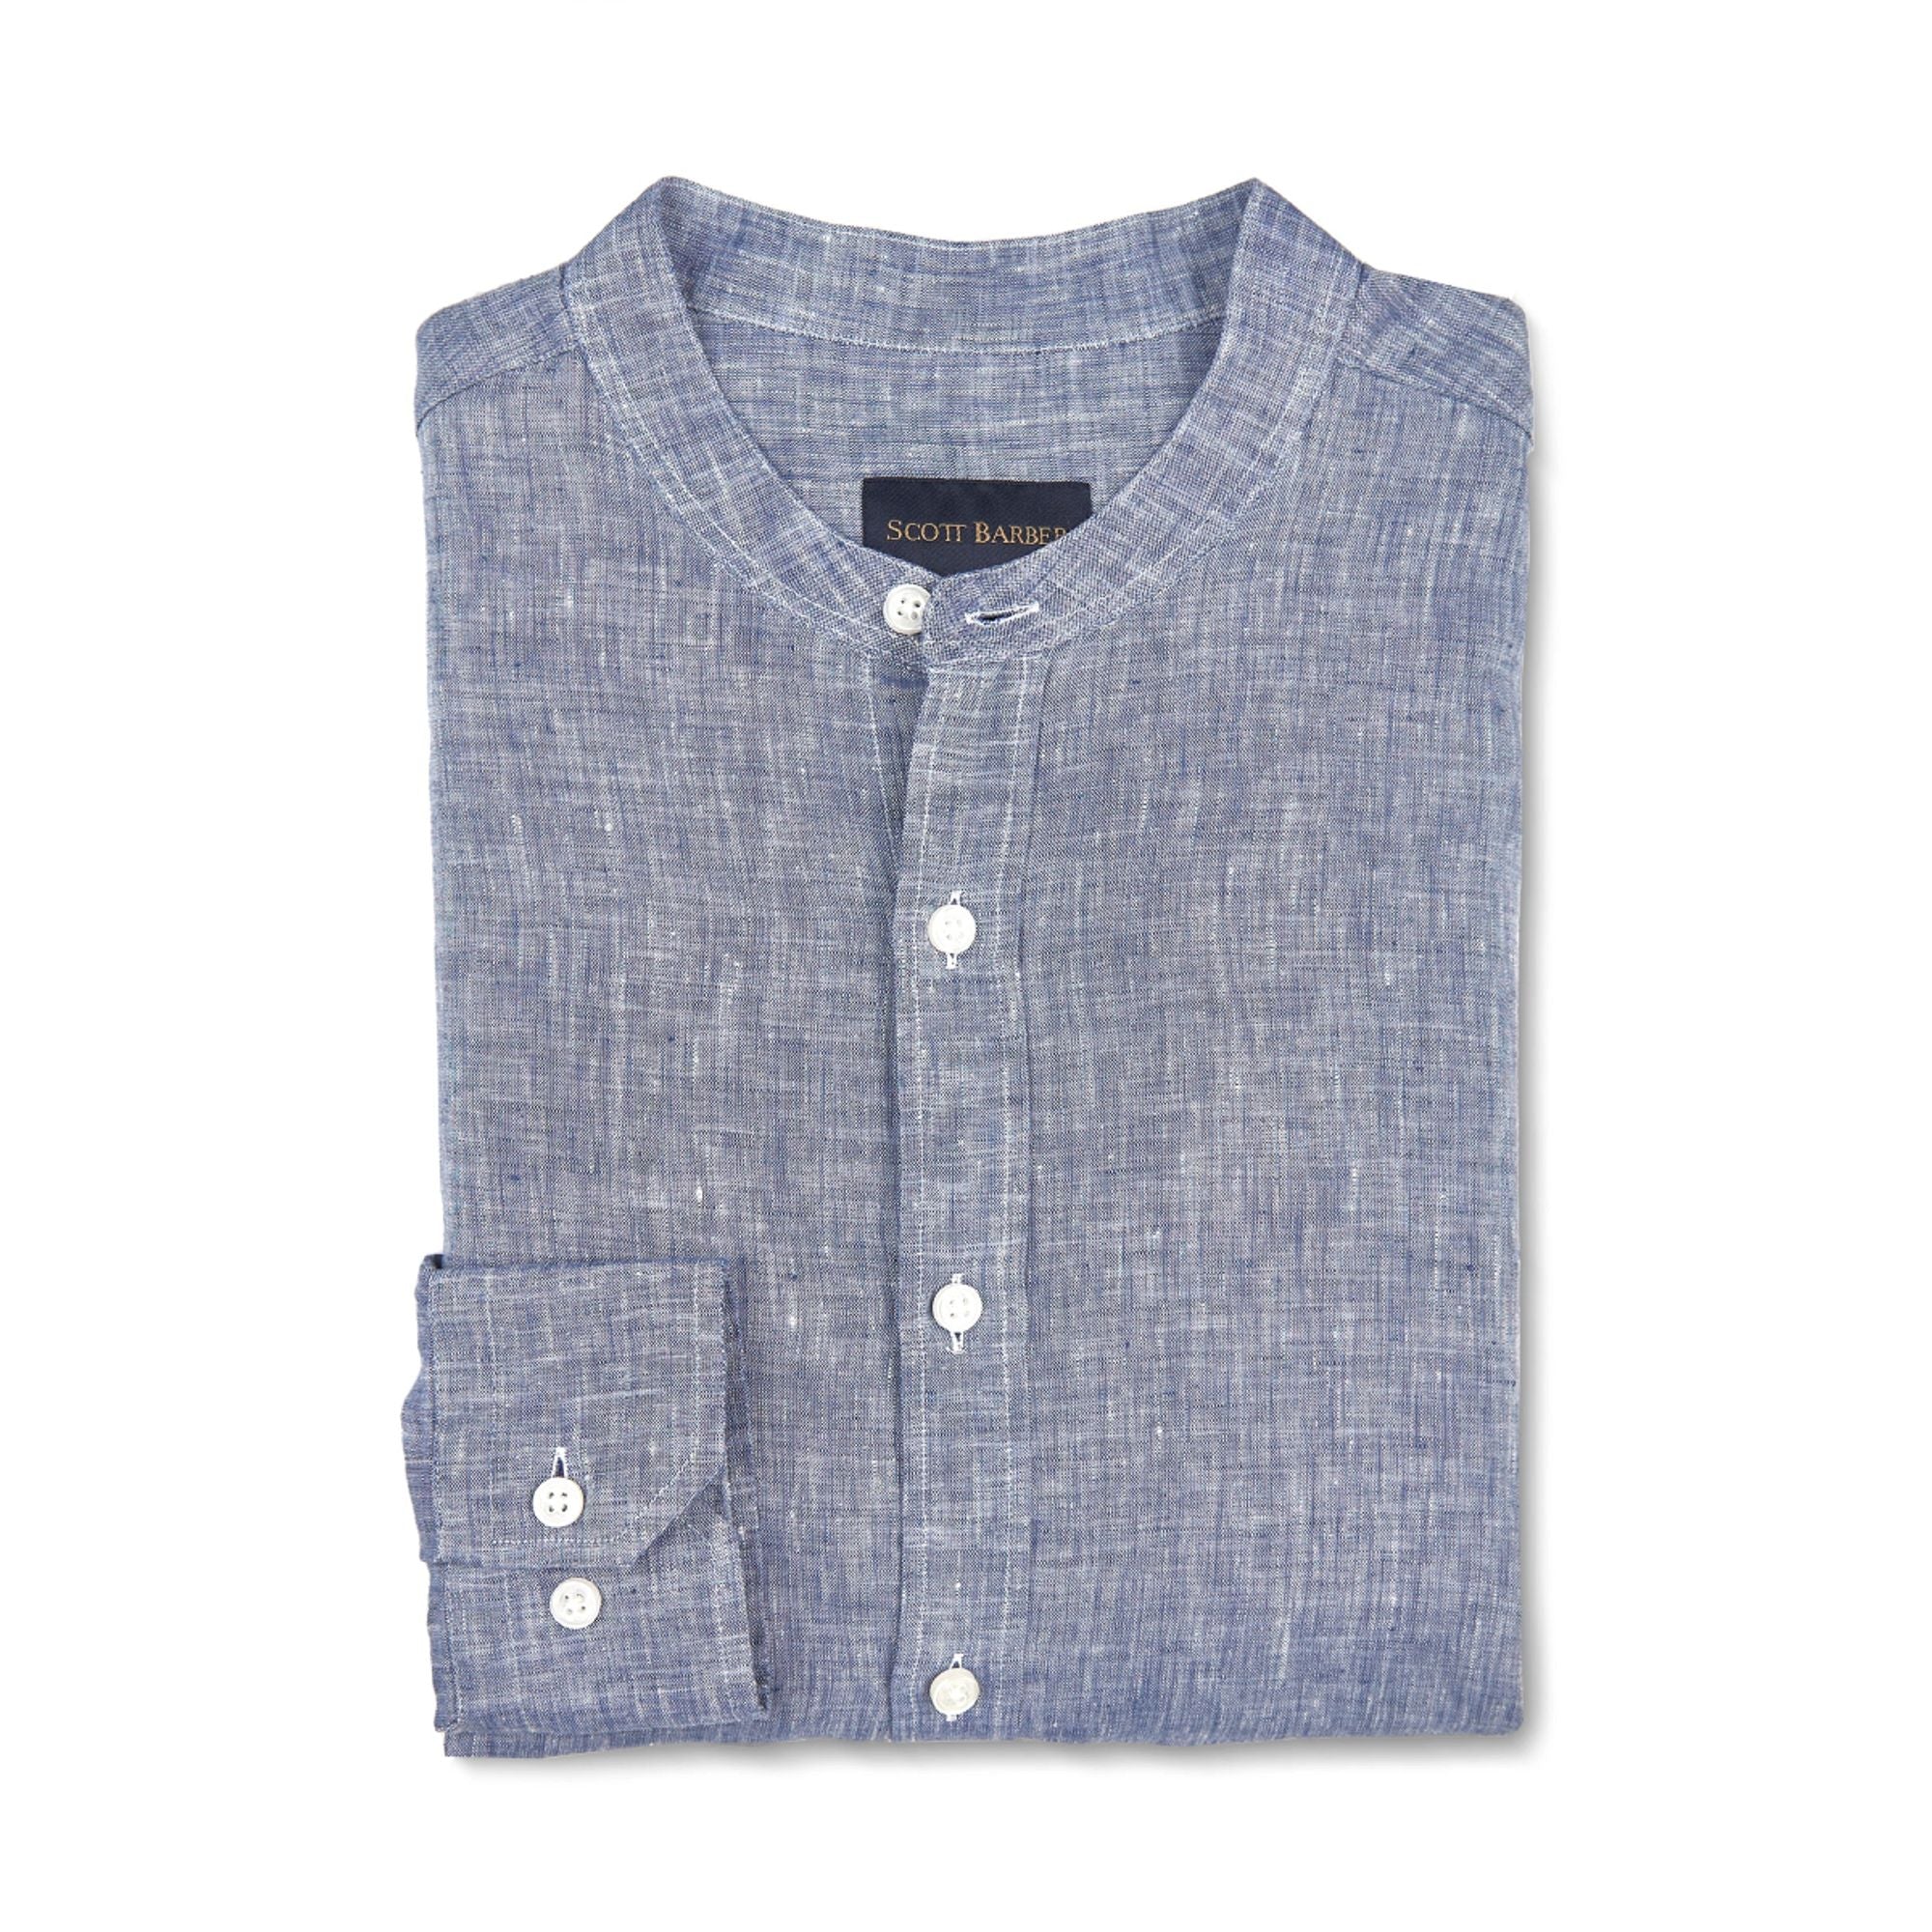 Solid Linen Long Sleeve Shirt with Banded Collar in Navy by Scott Barber